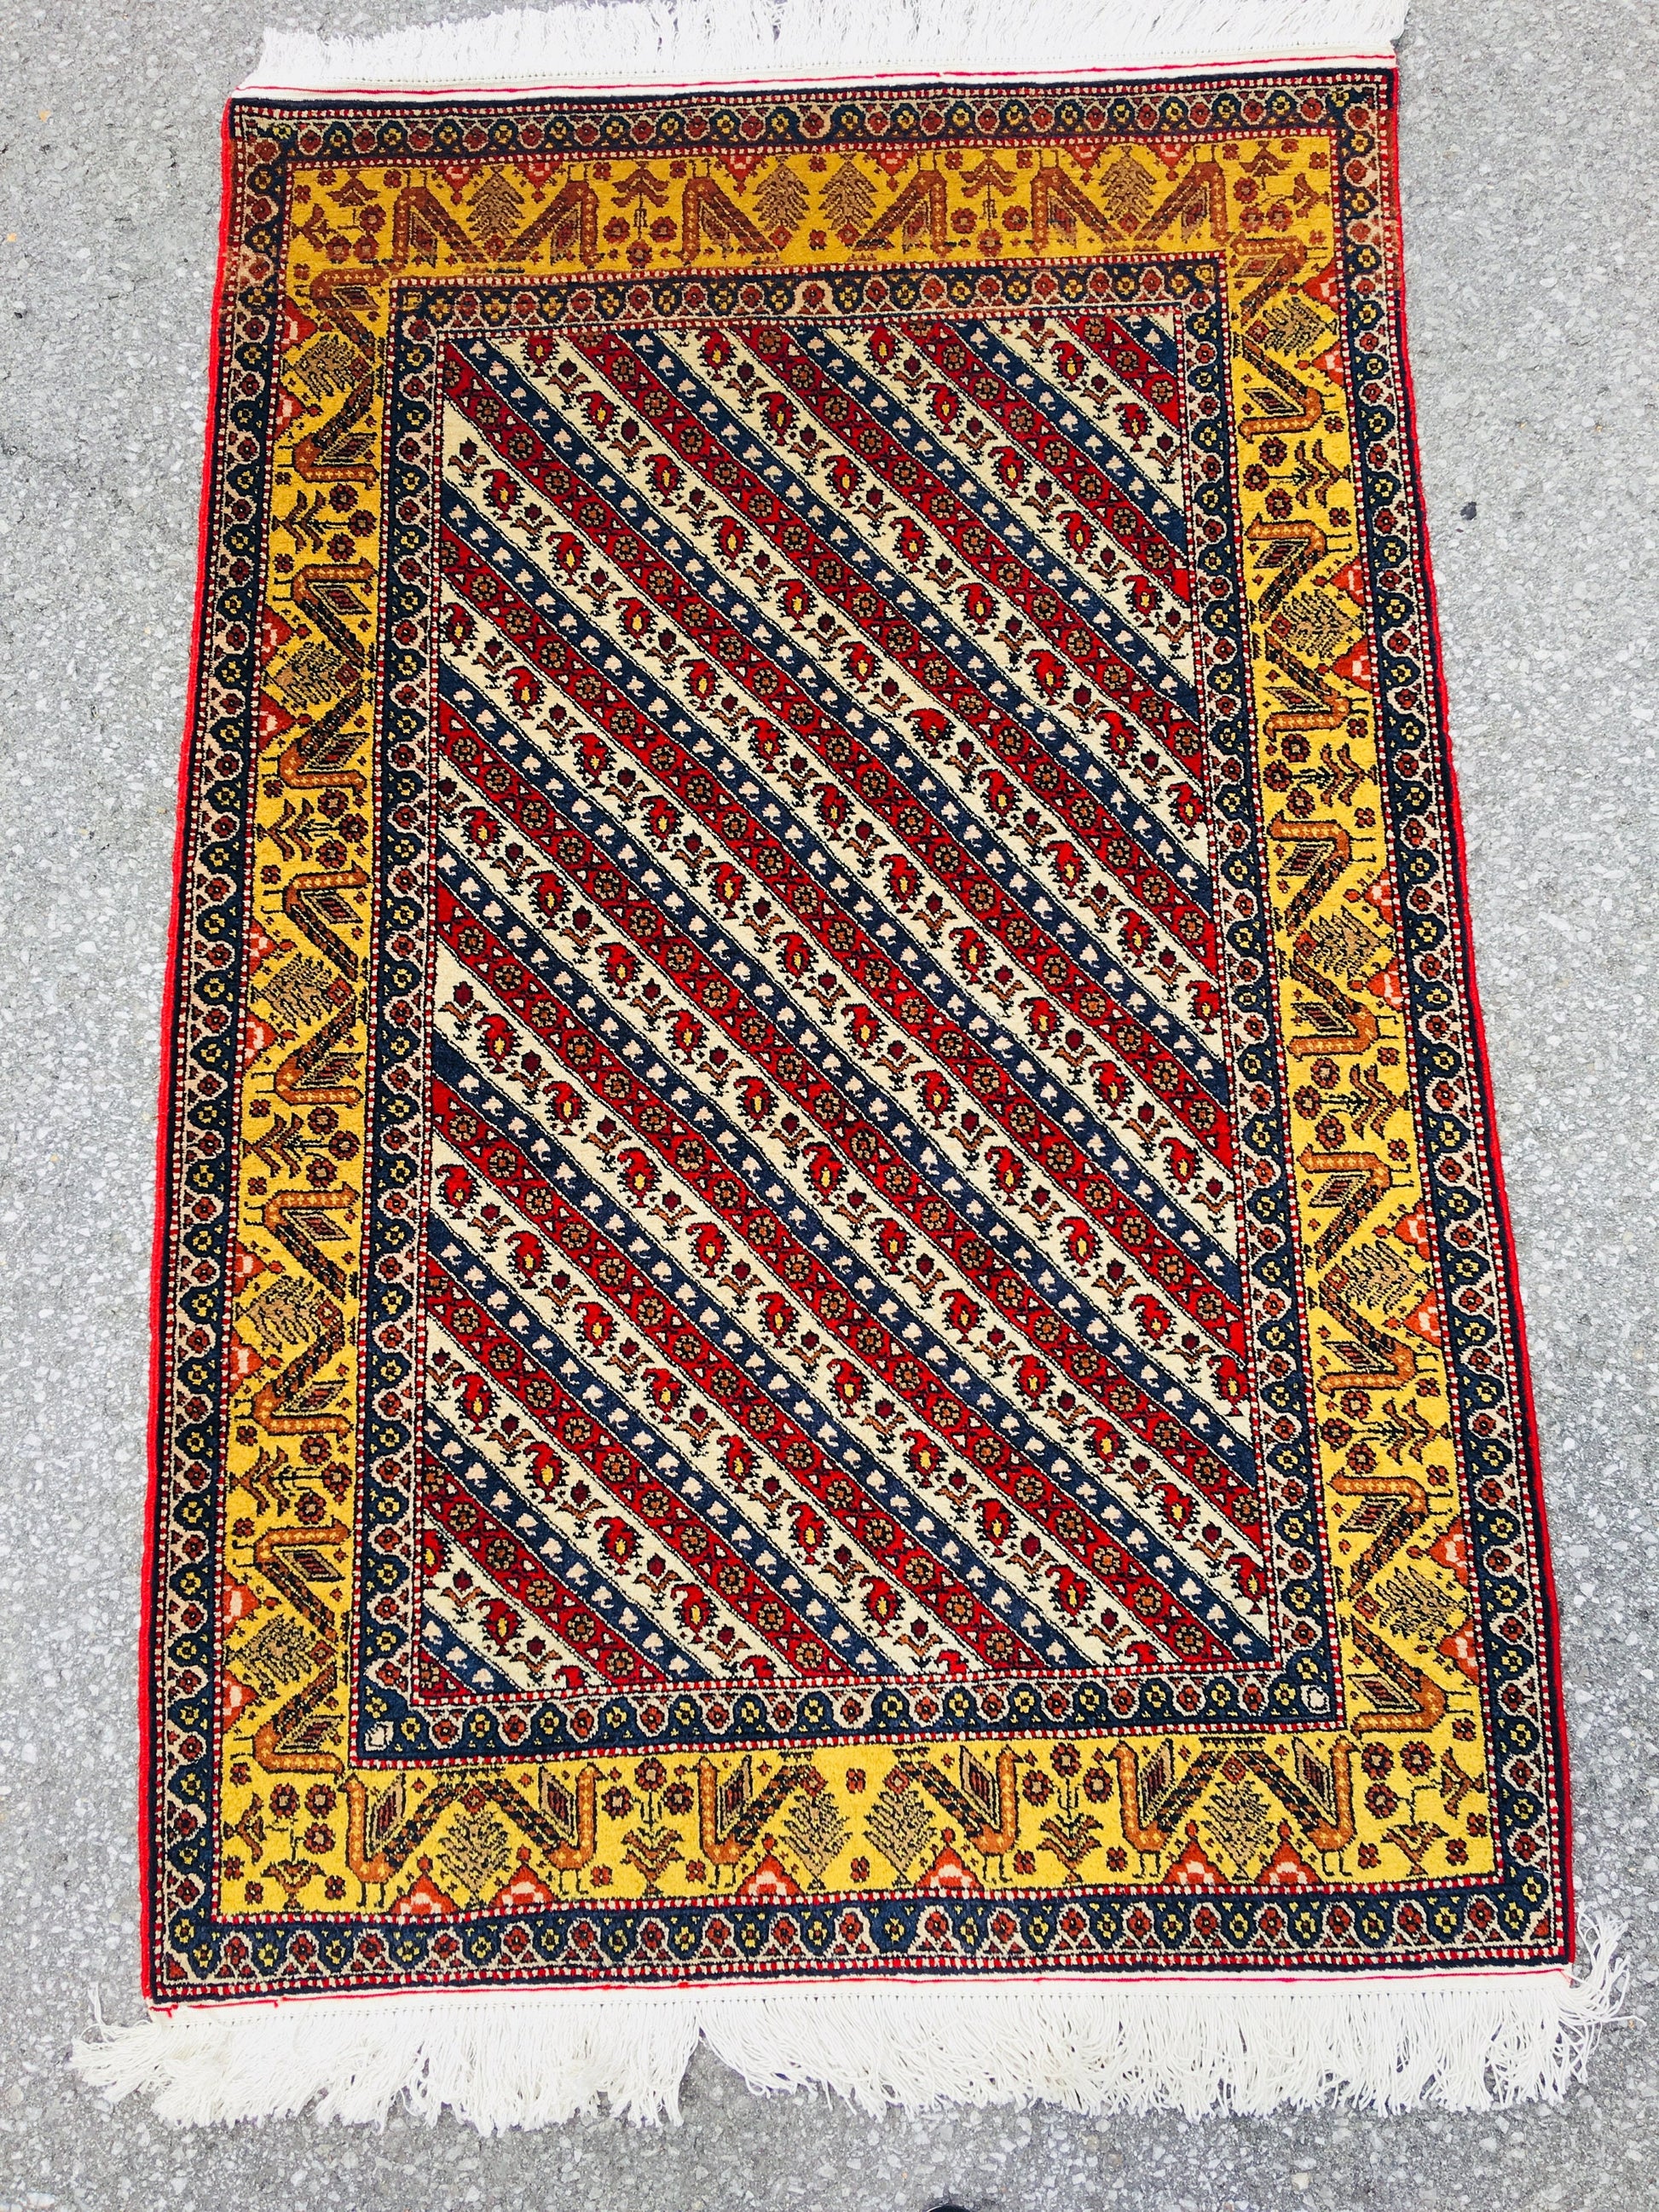 Oriental Striped Red White 3x5 Rug with Tribal Birds in Yellow Border